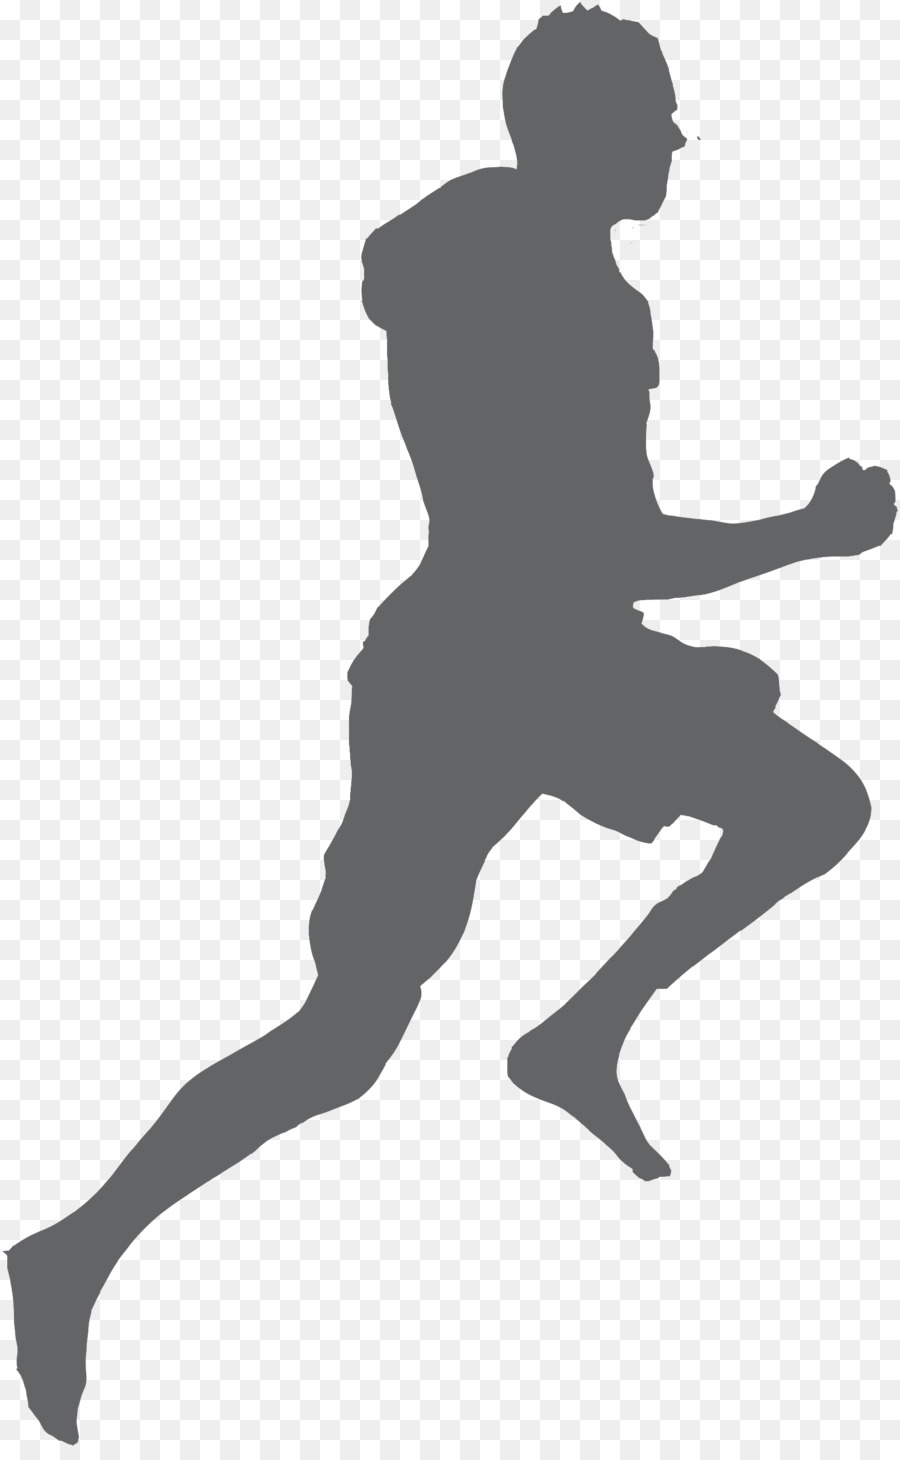 Silhouette Running Clip art - Silhouette png download - 1609*2589 - Free Transparent Silhouette png Download.